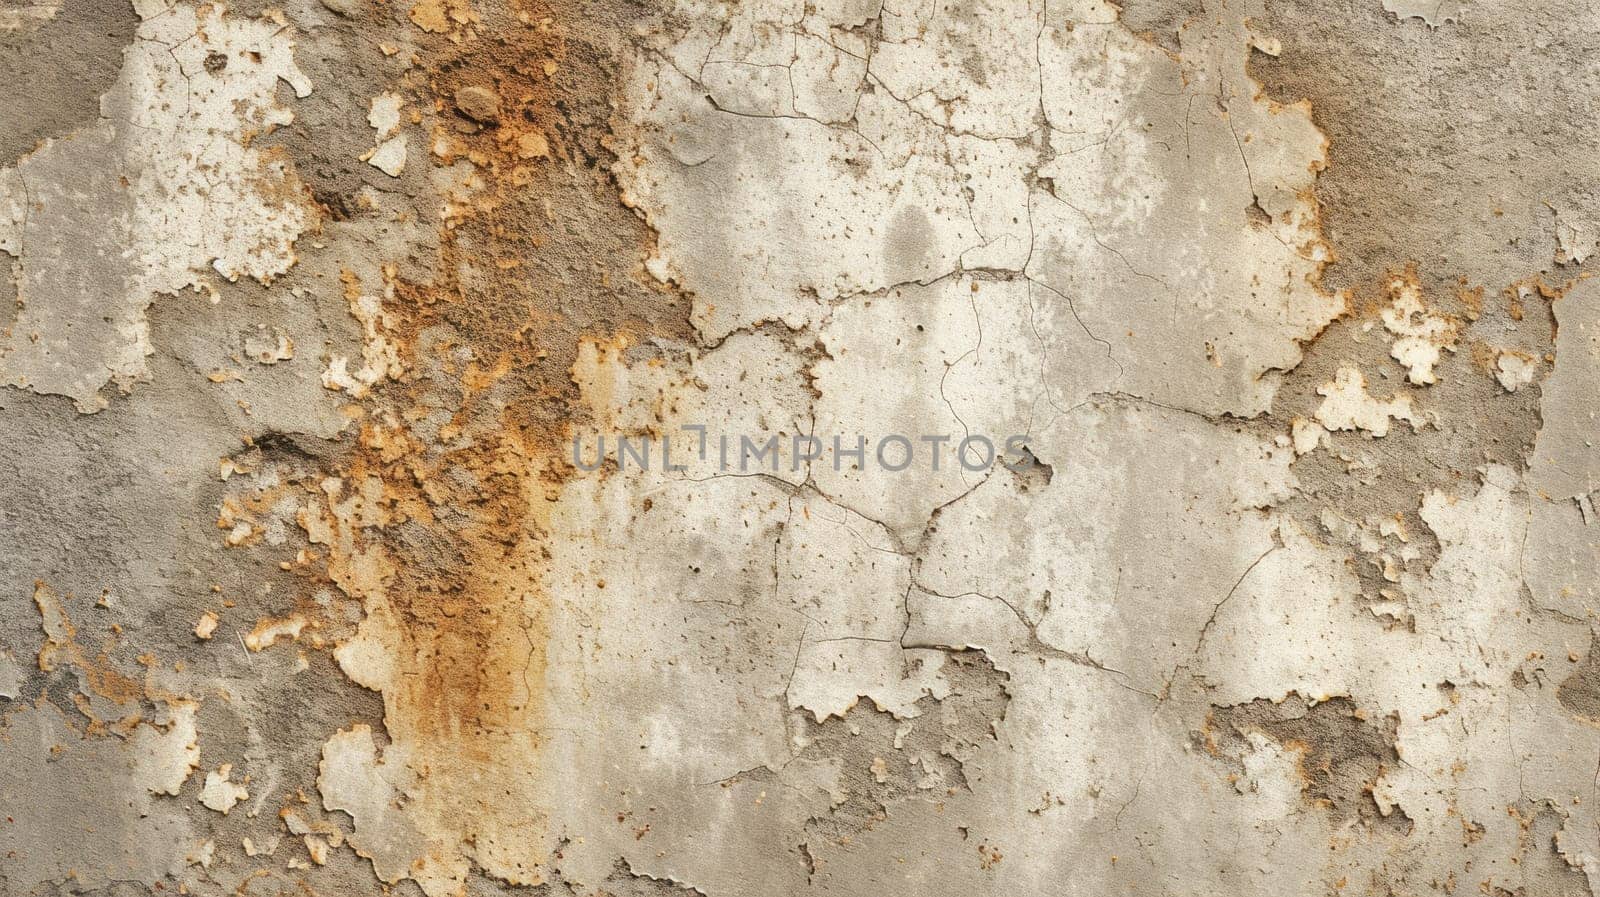 Decayed elegance of rustic concrete. Created using AI generated technology and image editing software.